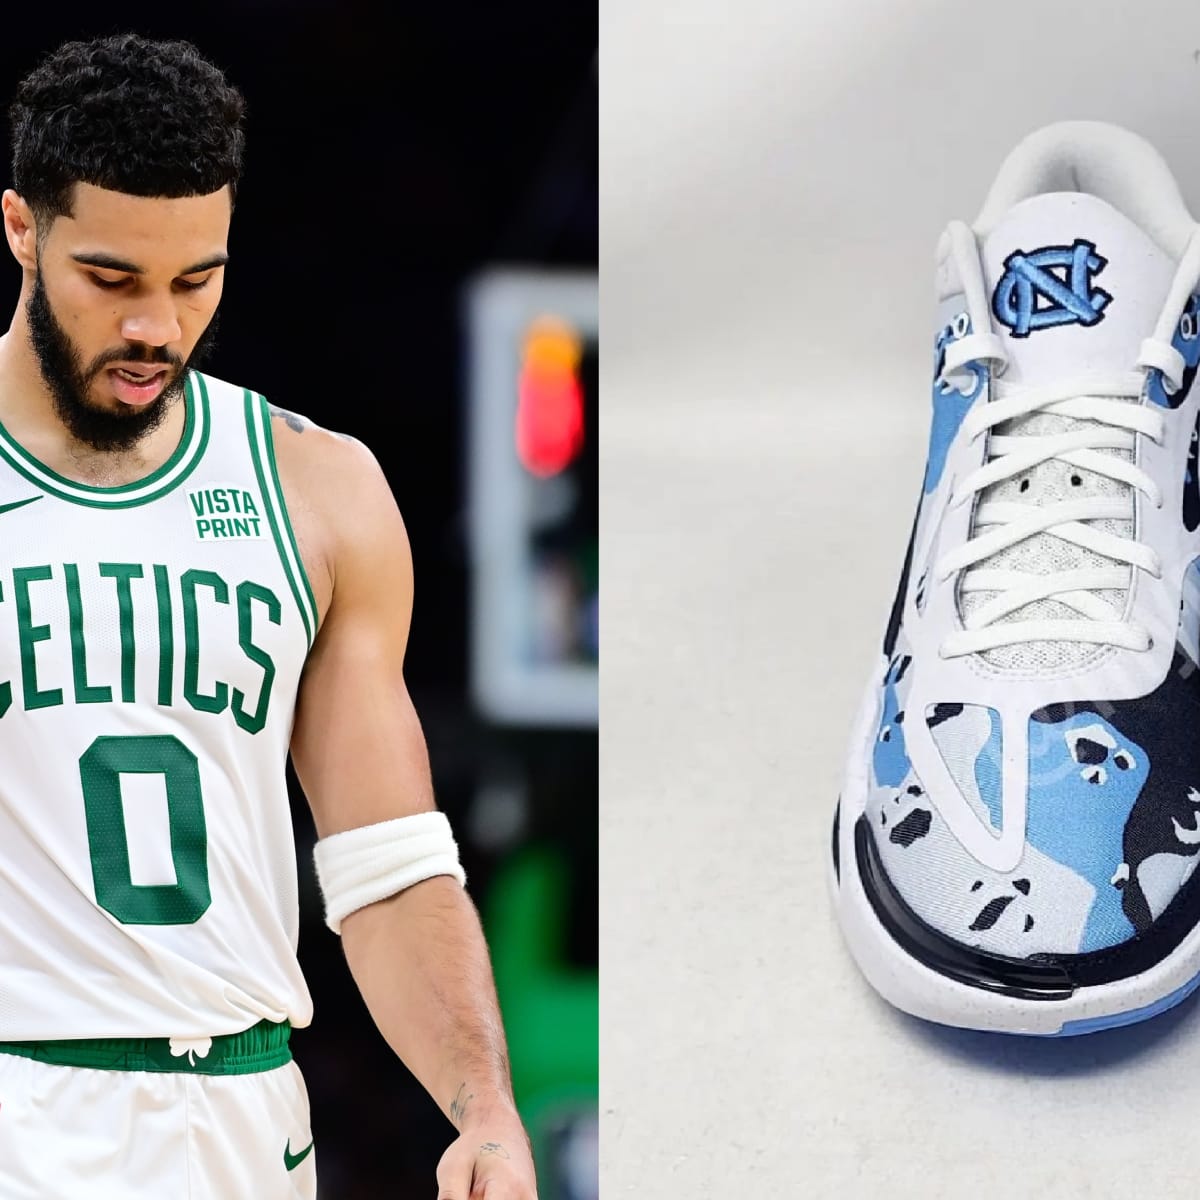 Jordan Brand Designs New Style of Jayson Tatum's Shoes for UCLA - Sports  Illustrated FanNation Kicks News, Analysis and More